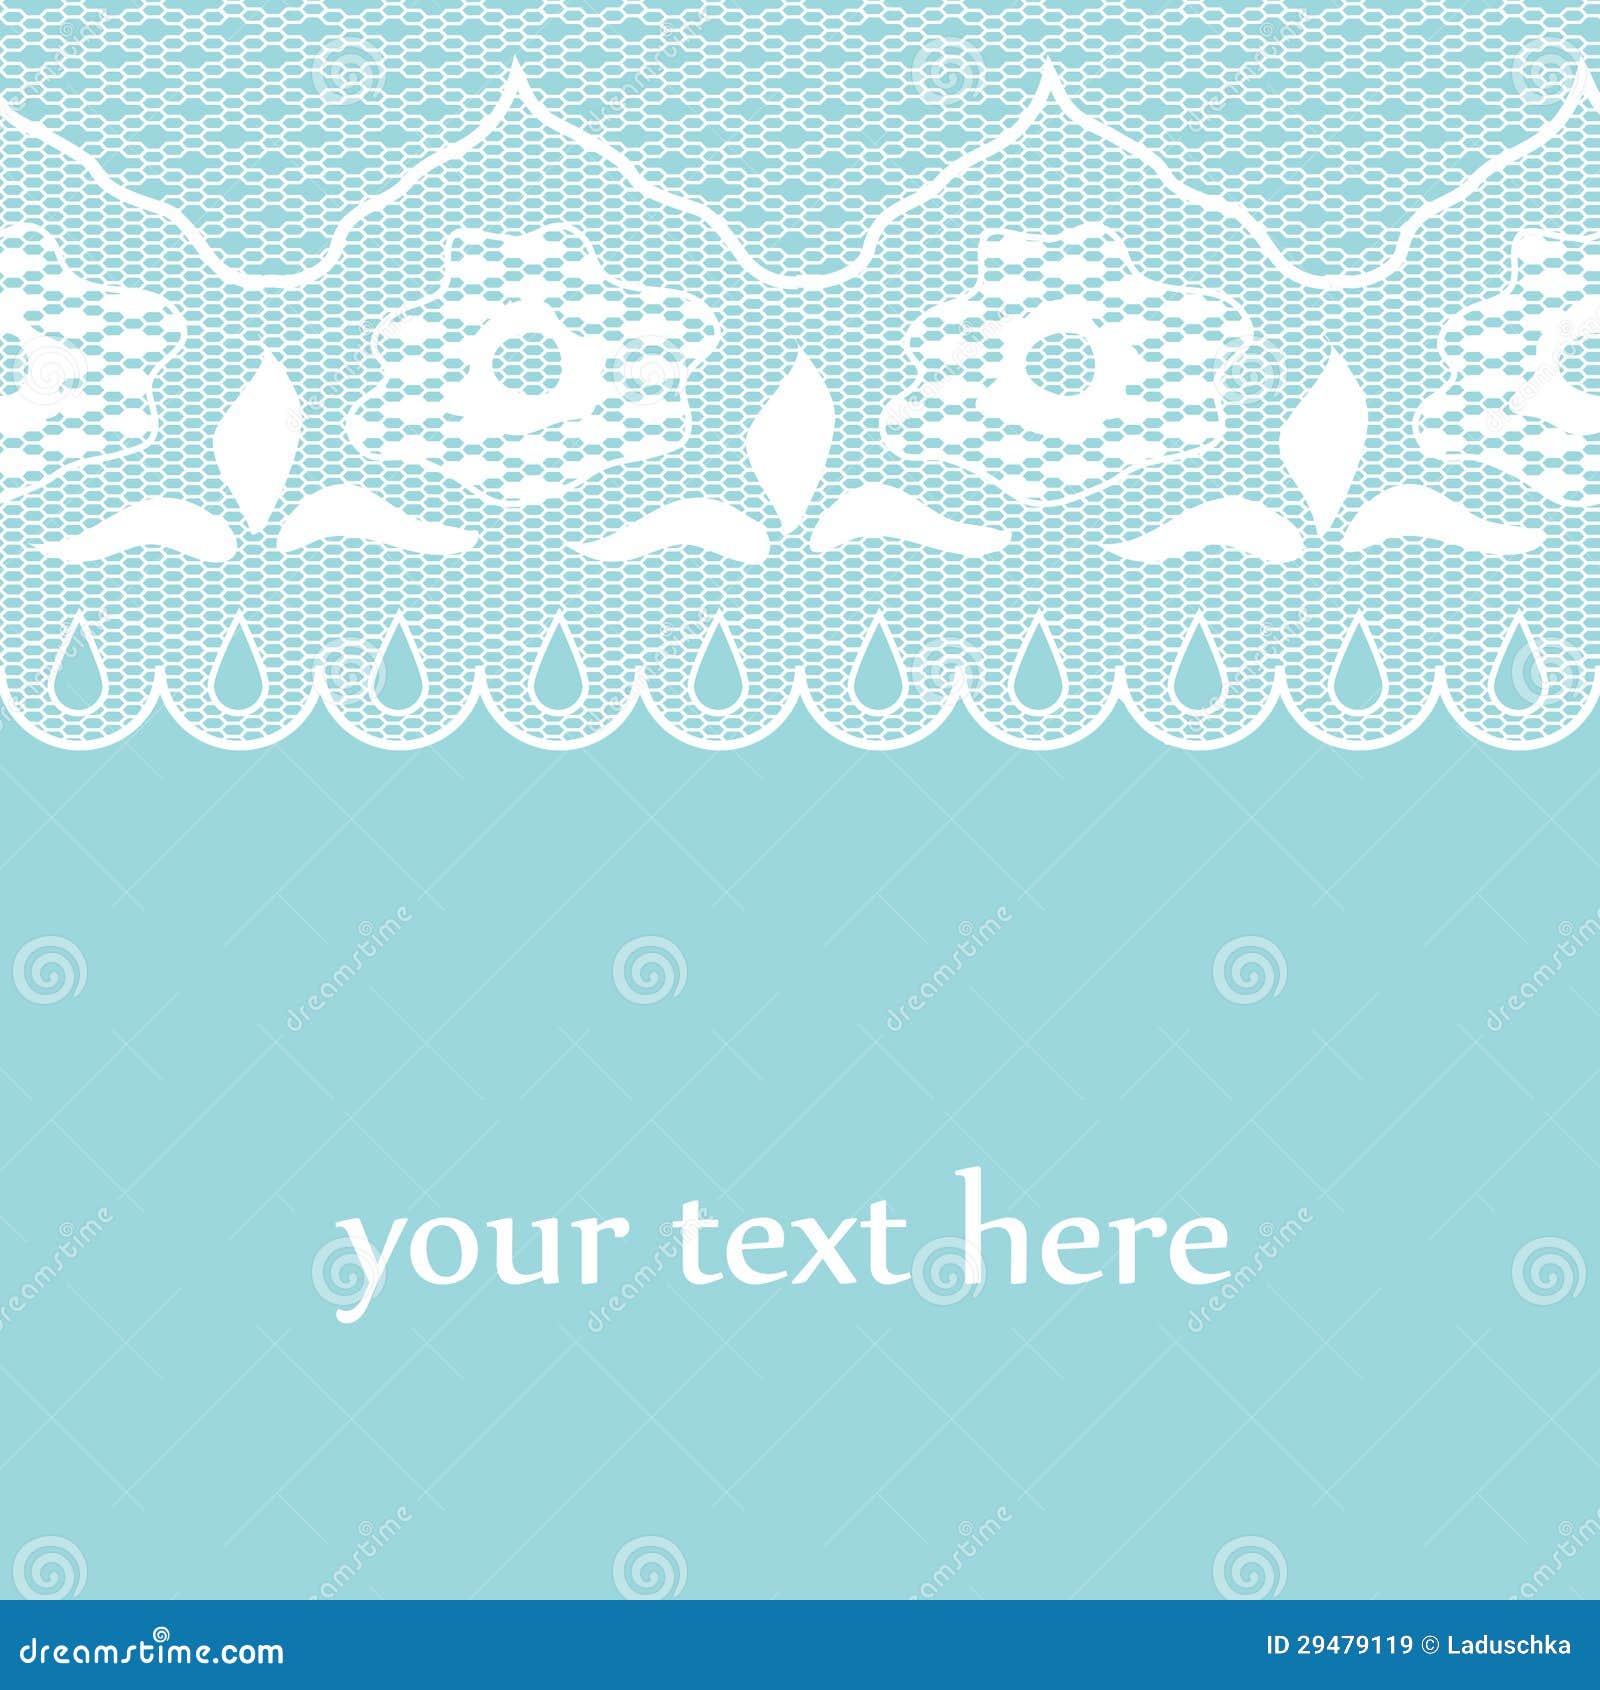 backgrounds lace tumblr Retro Royalty Background Strip. With Blue Seamless Lace